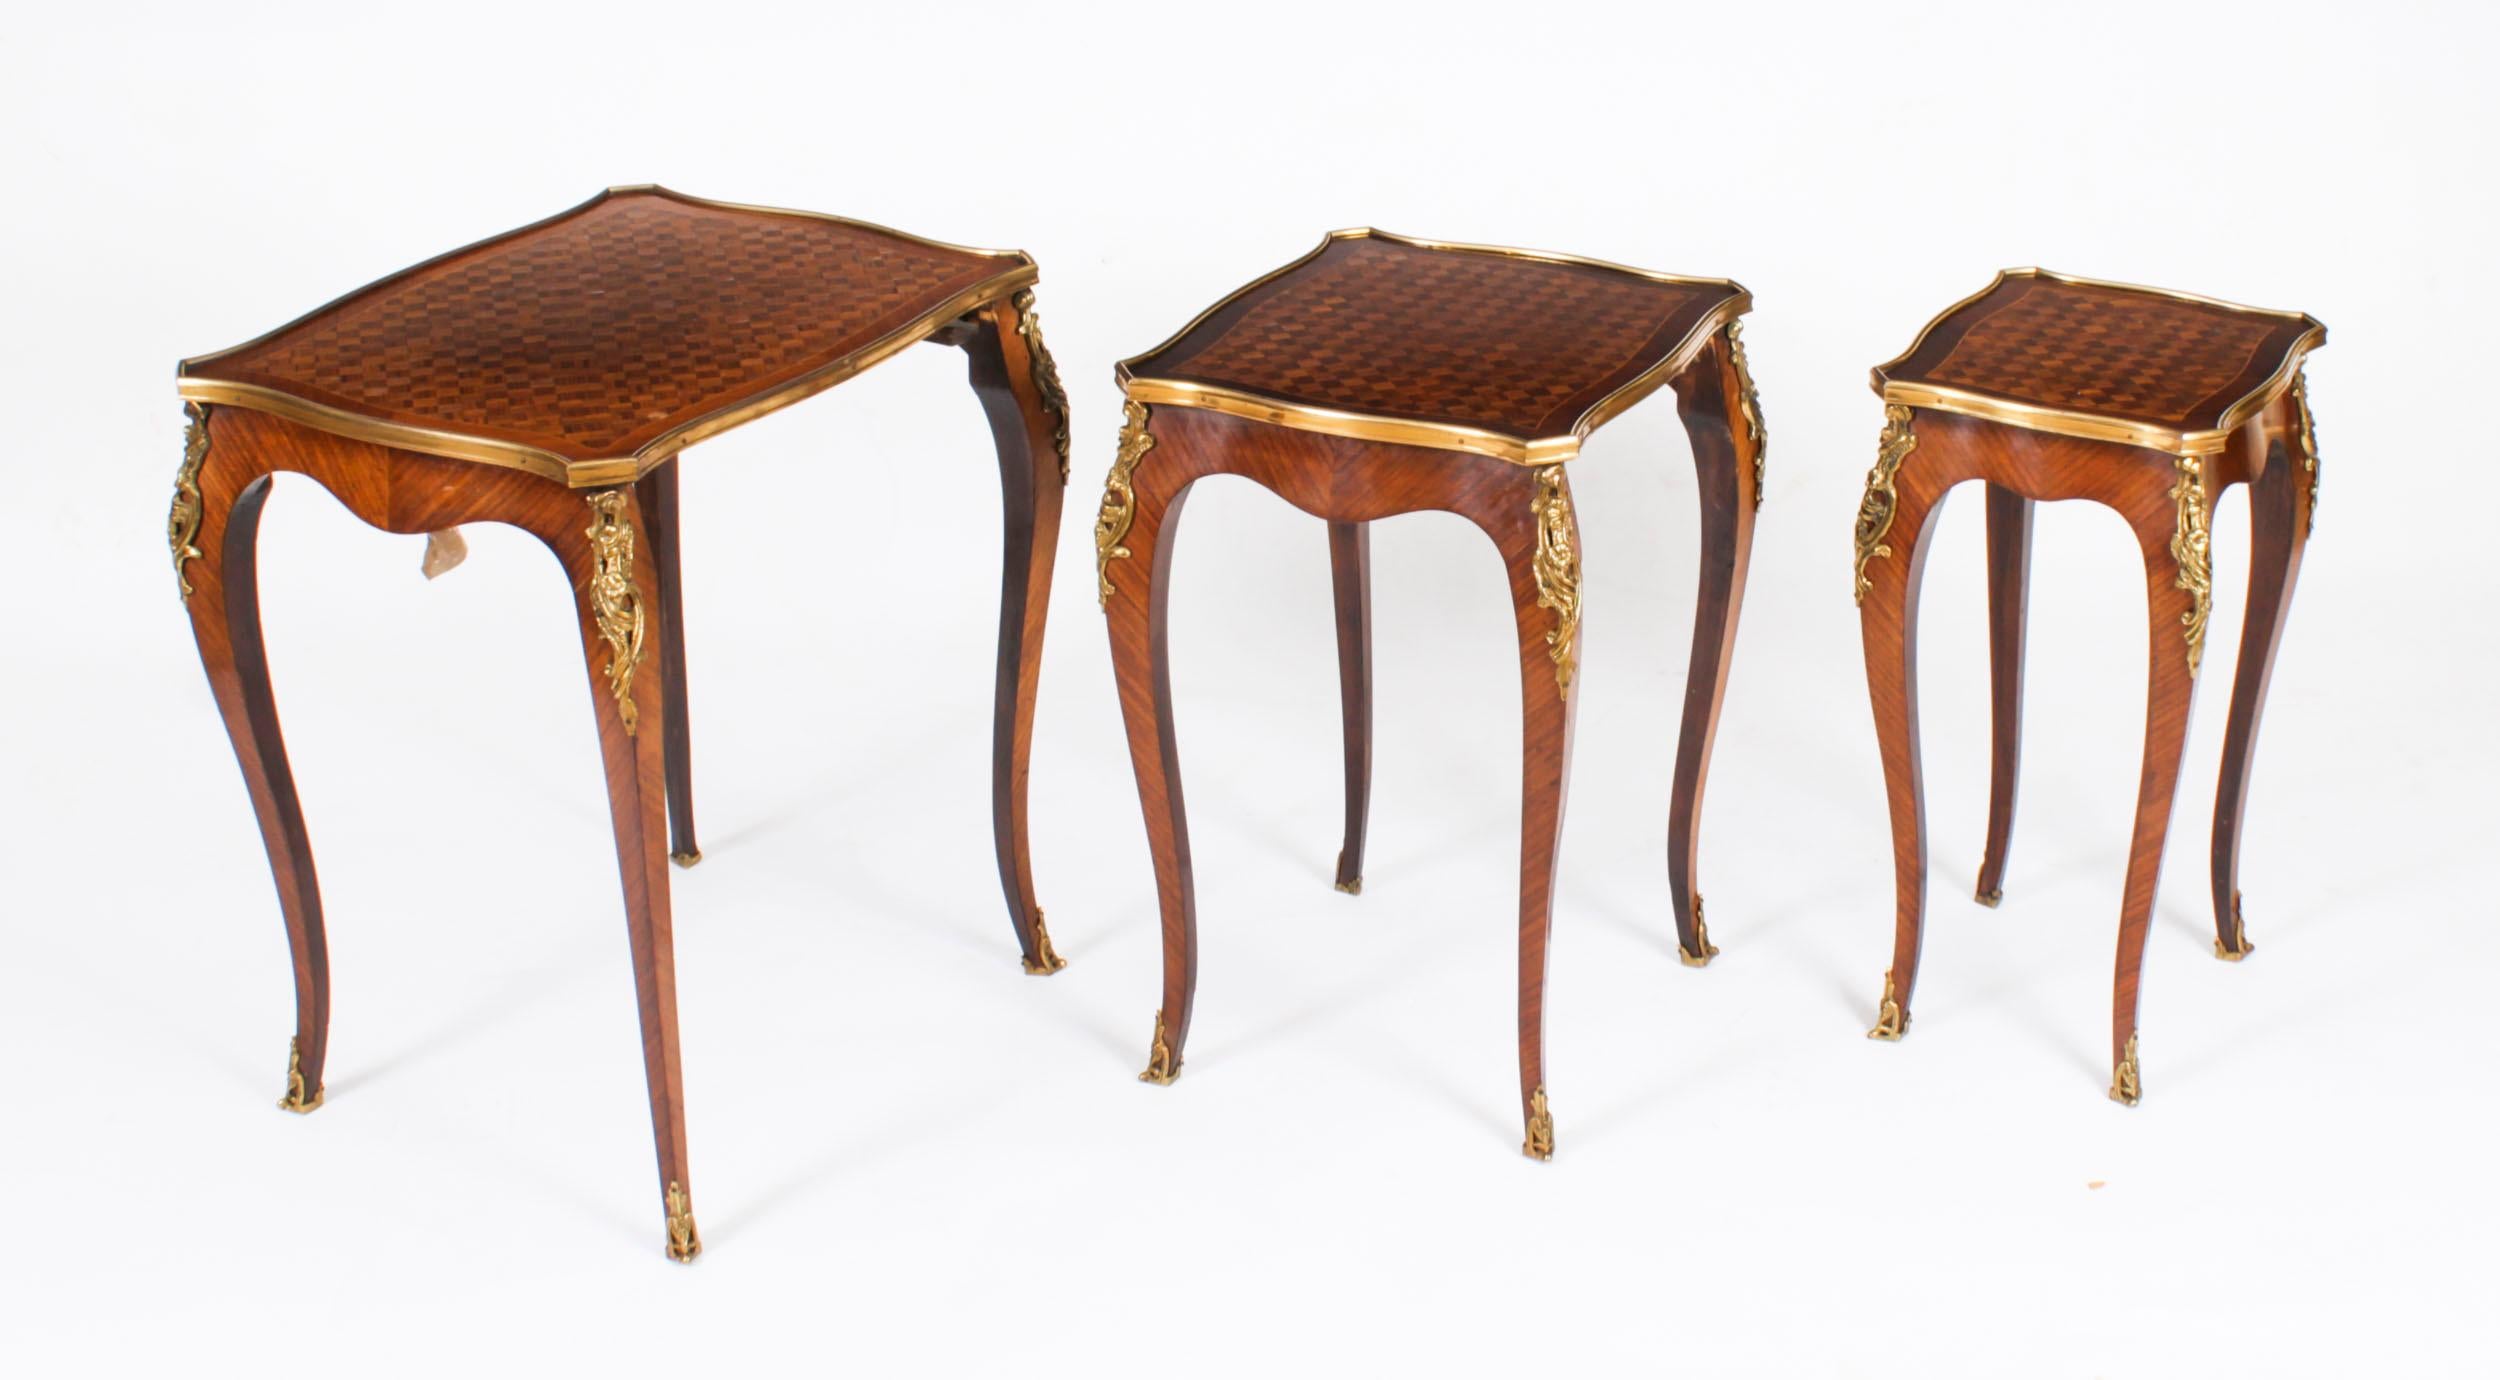 This is a fine antique French Louis Revival Walnut and Ormolu mounted parquetry nest of  tables, circa 1900 in date.

The nest consists of a set of three interlocking tables each with  parquetry  decoration,  shaped rectangular tops with ormolu